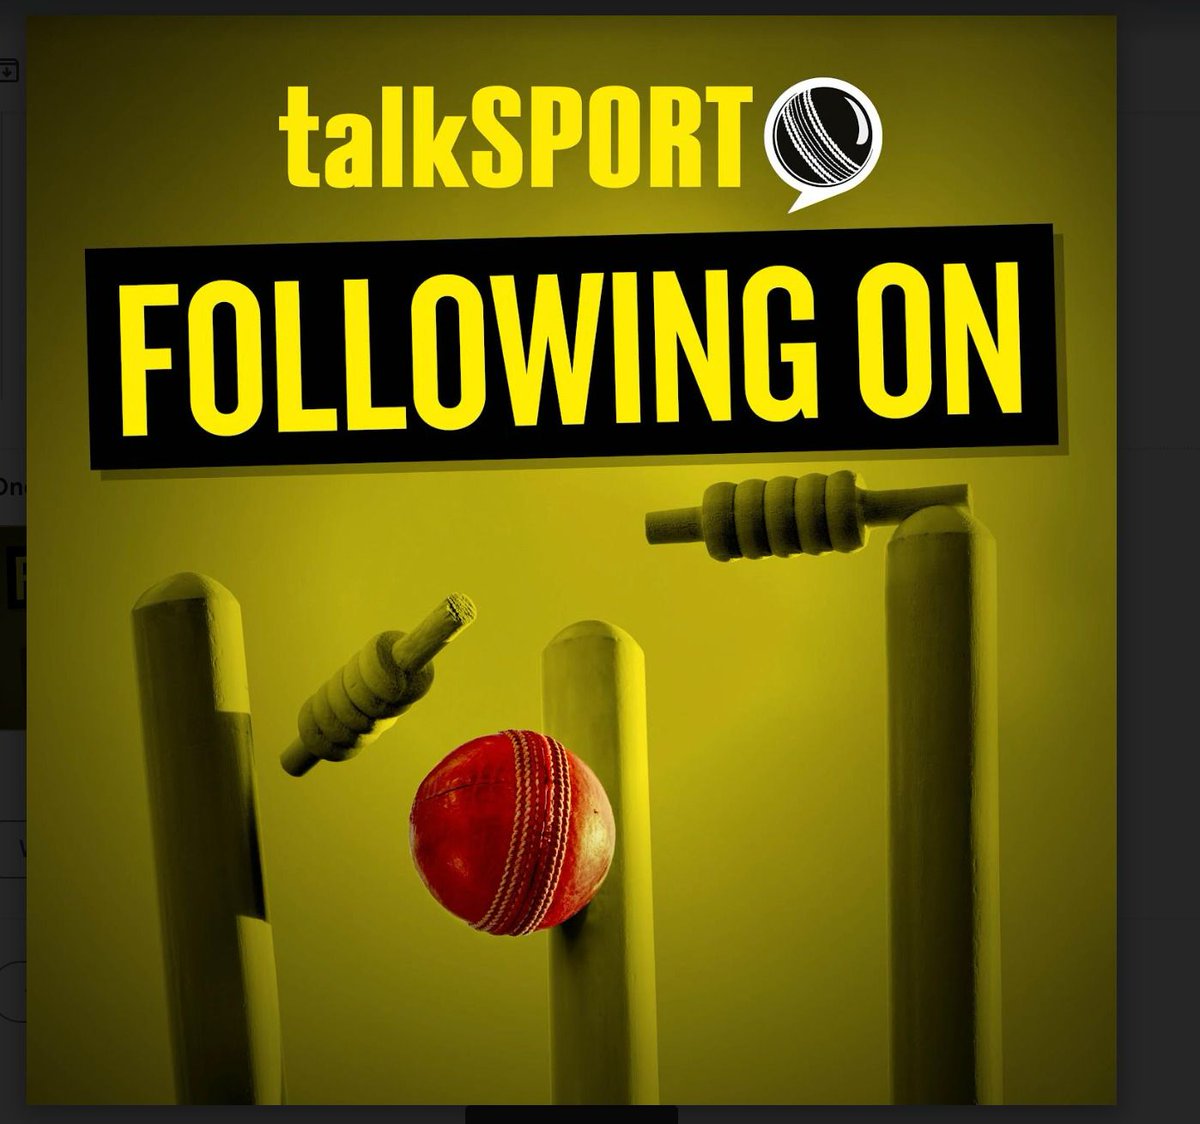 🚨 𝐍𝐄𝐖 𝐏𝐎𝐃𝐂𝐀𝐒𝐓 🚨 🎙️ Jon Norman, Jarrod Kimber & David Lloyd discuss match-fixing in Cricket: 🔘 Is it still an issue in the Sport? 🔘 Are the media turning a blind eye to it? 🔘 What can be done to stamp it out? ➕ More! 📱 Listen 👉 pod.fo/e/23d30d